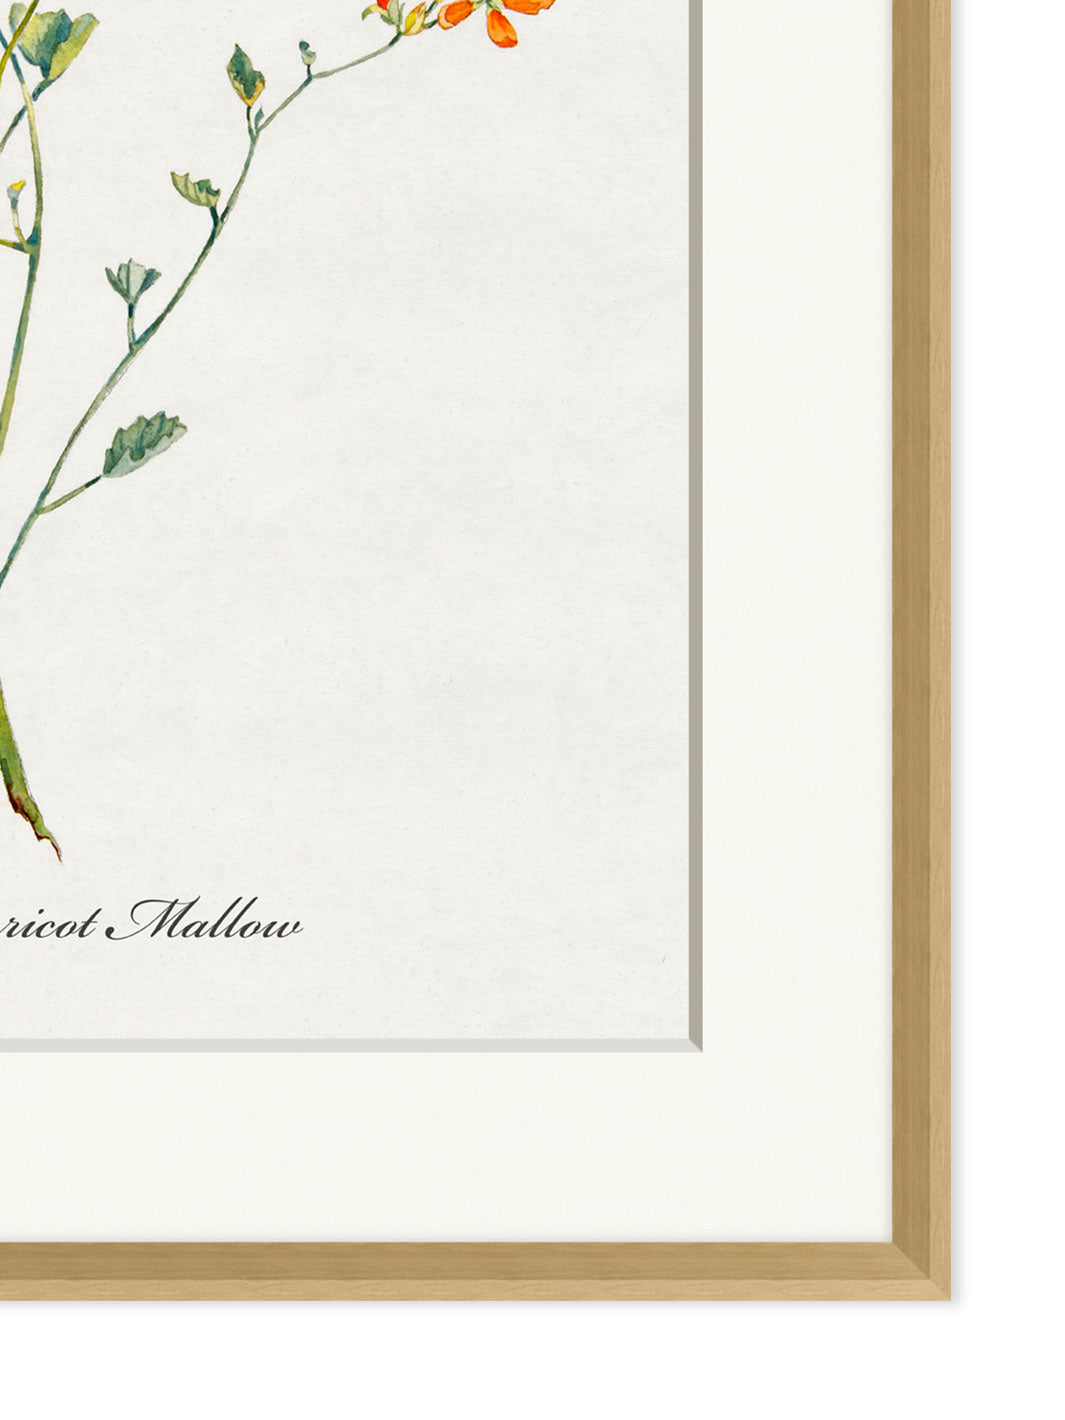 'Valley Wildflower Apricot Mallow' by Nathan Turner Framed Art